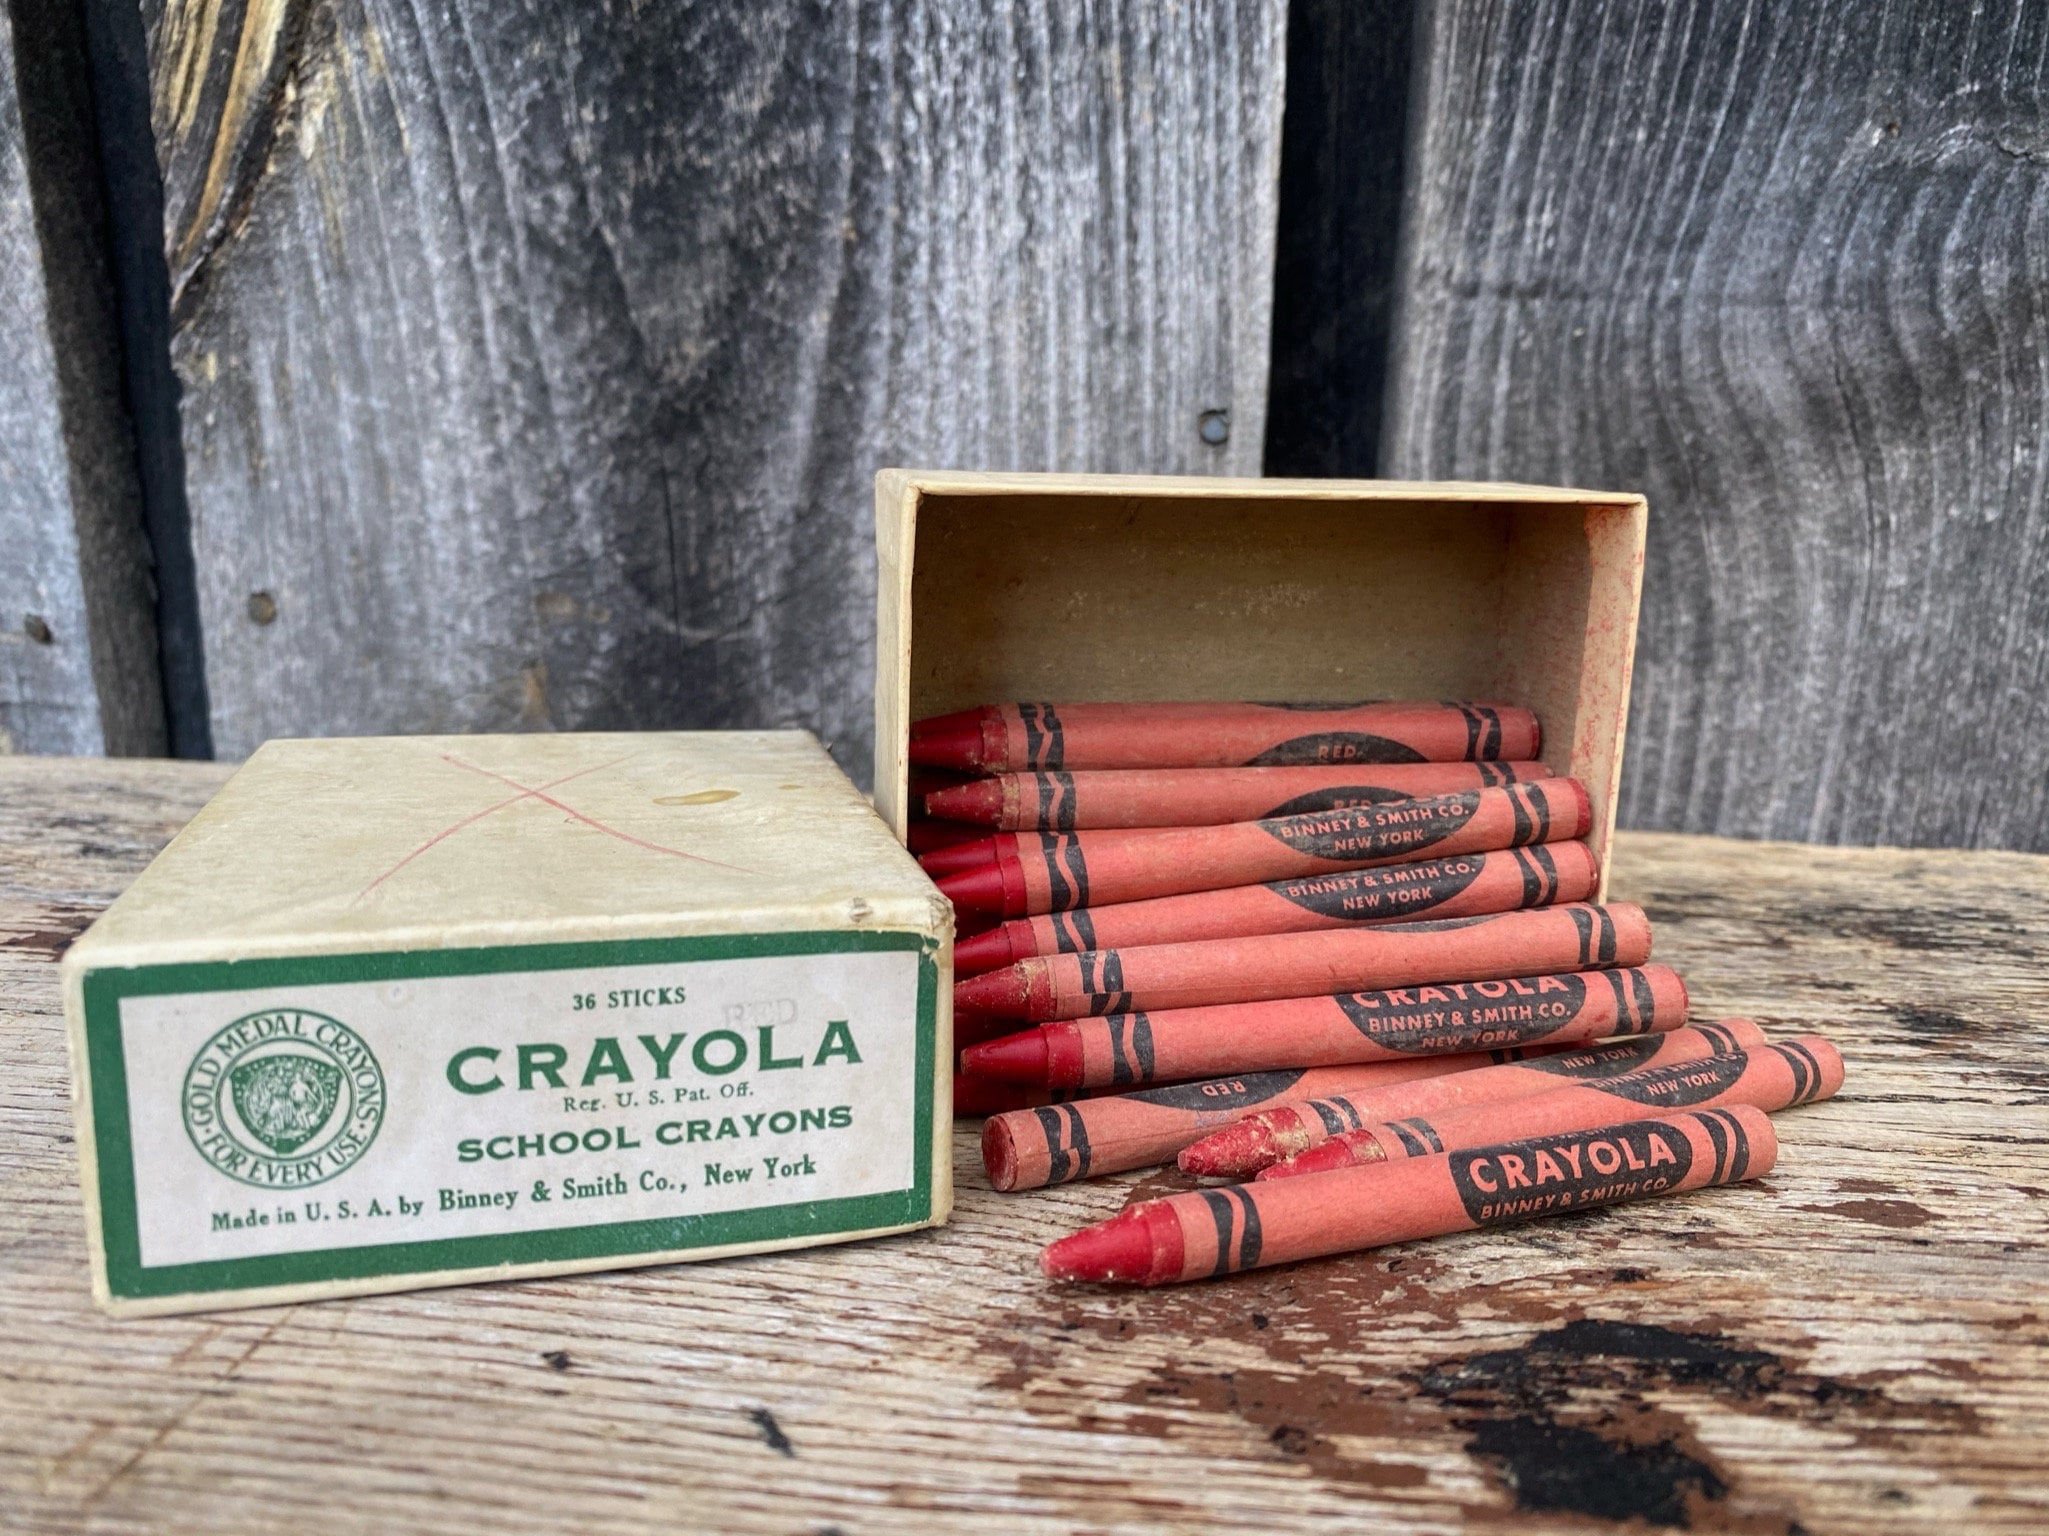 Vintage Artista Crayons Set of 24 by Binney & Smith Inc., 1970s Artist's  Crayon Set, No. 8524 Drawing and Sketching Crayons 